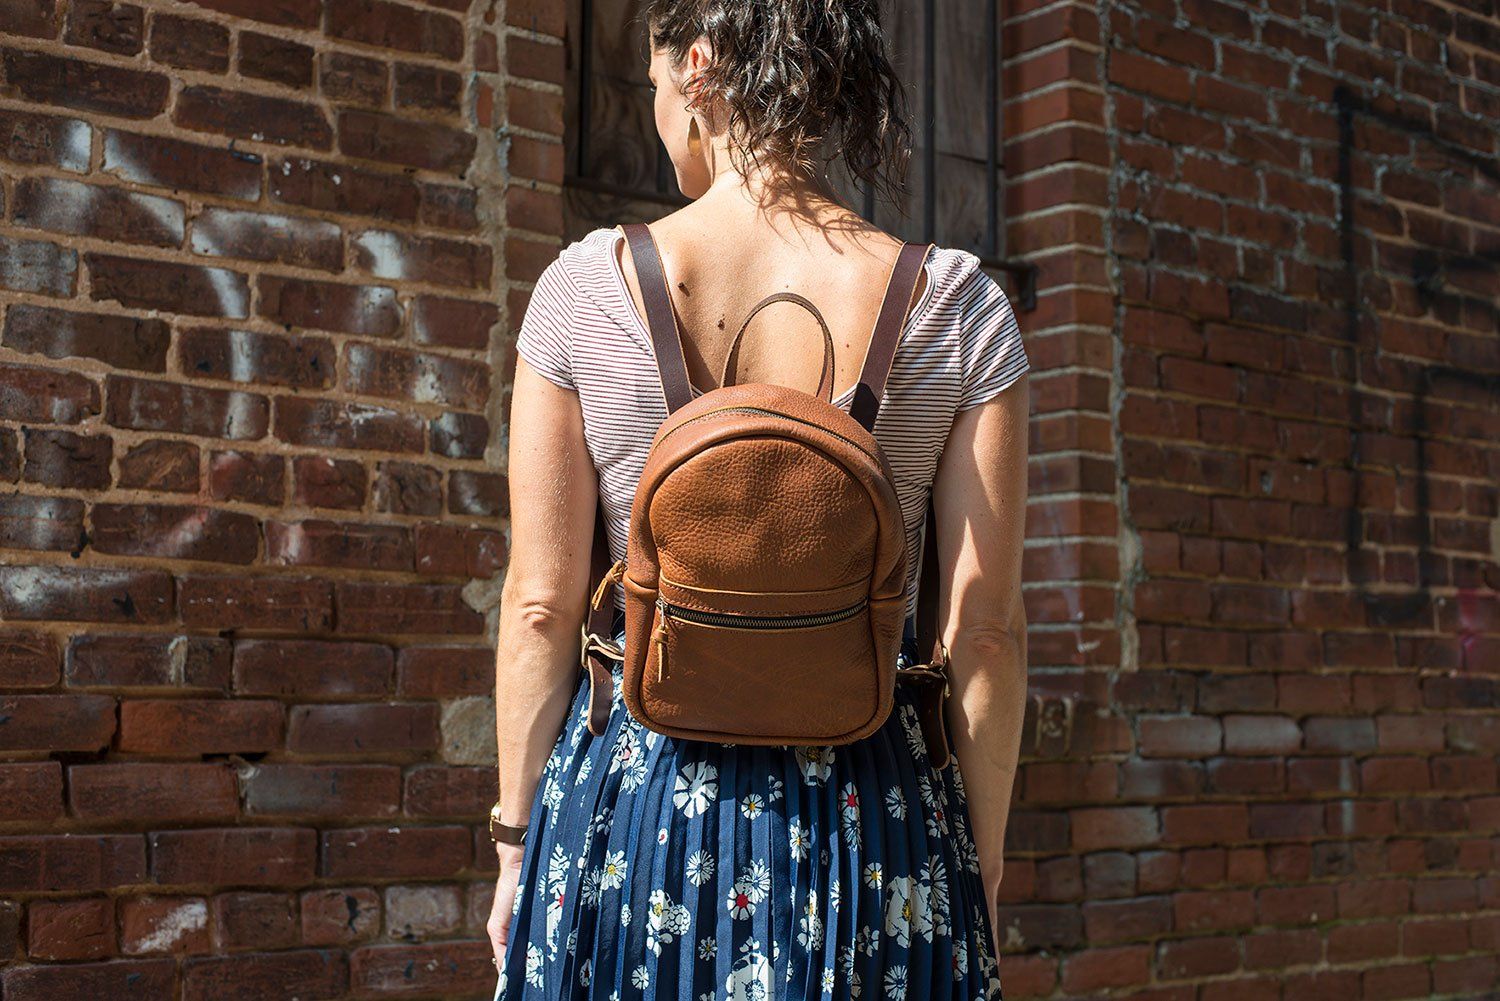 CLASSIC ZIPPERED SMALL LEATHER BACKPACK PURSE (RTS) - Go Forth Goods ®